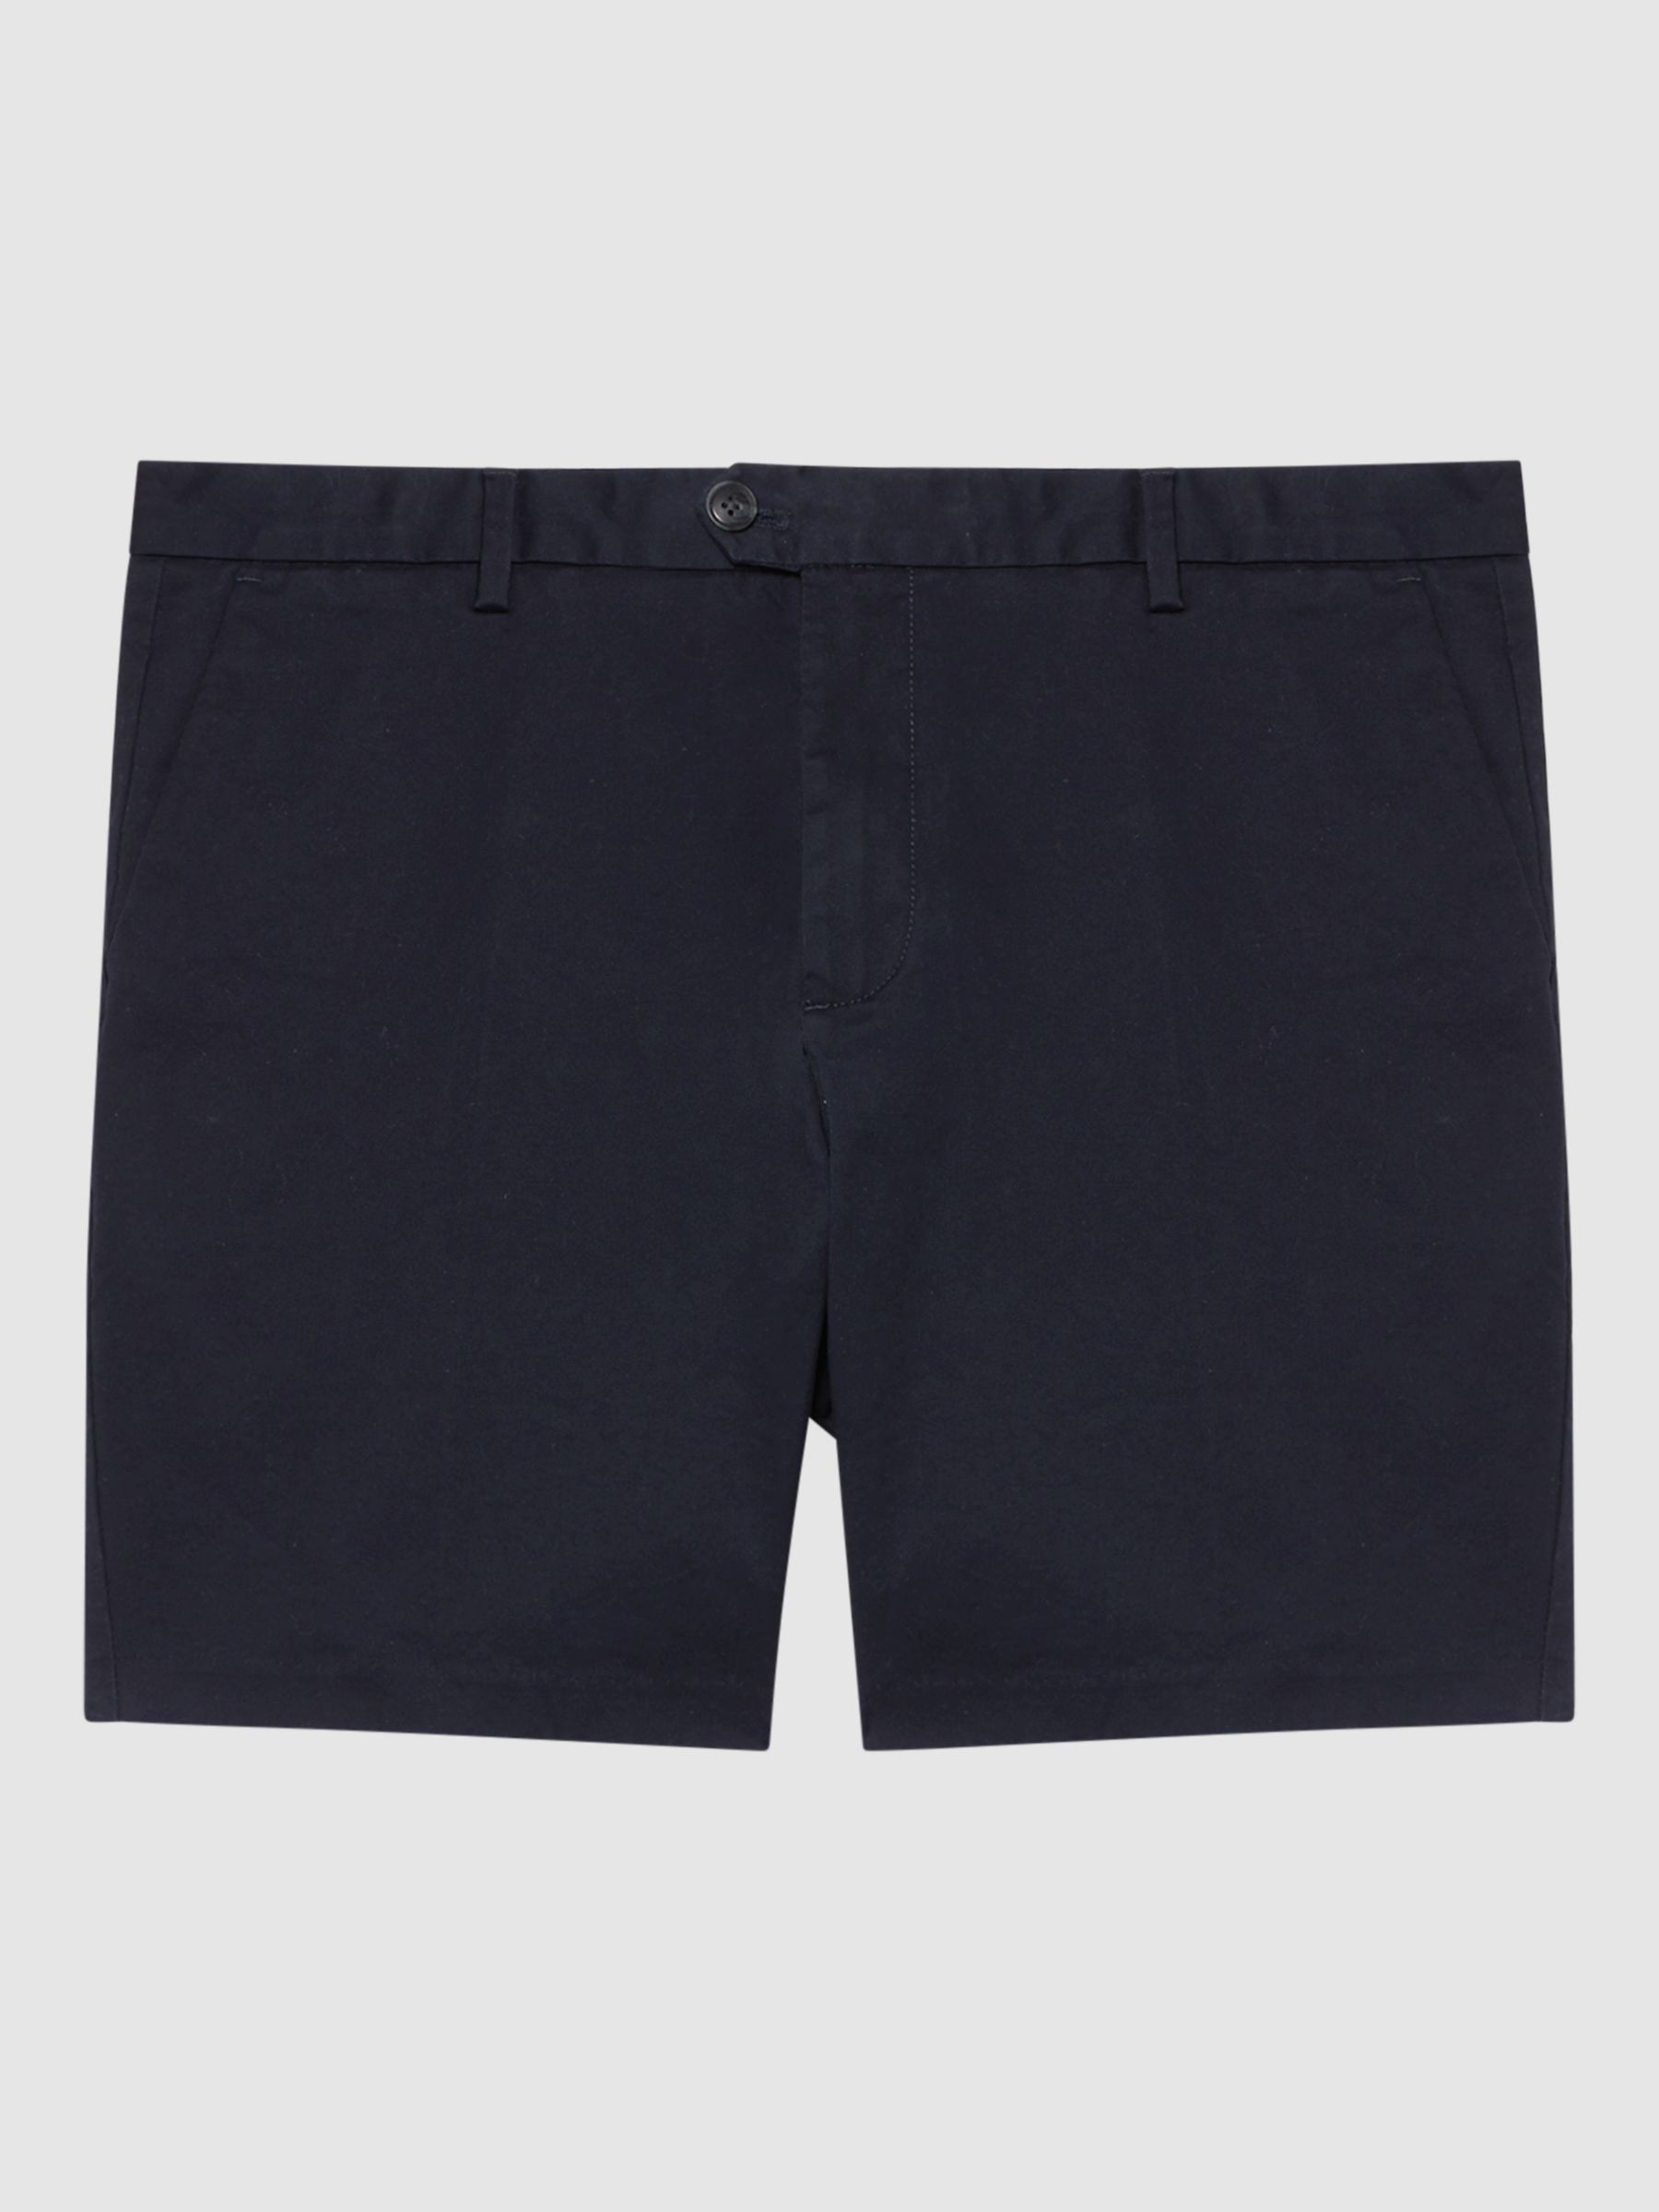 Reiss Wicket Casual Chino Shorts, Navy, 34R